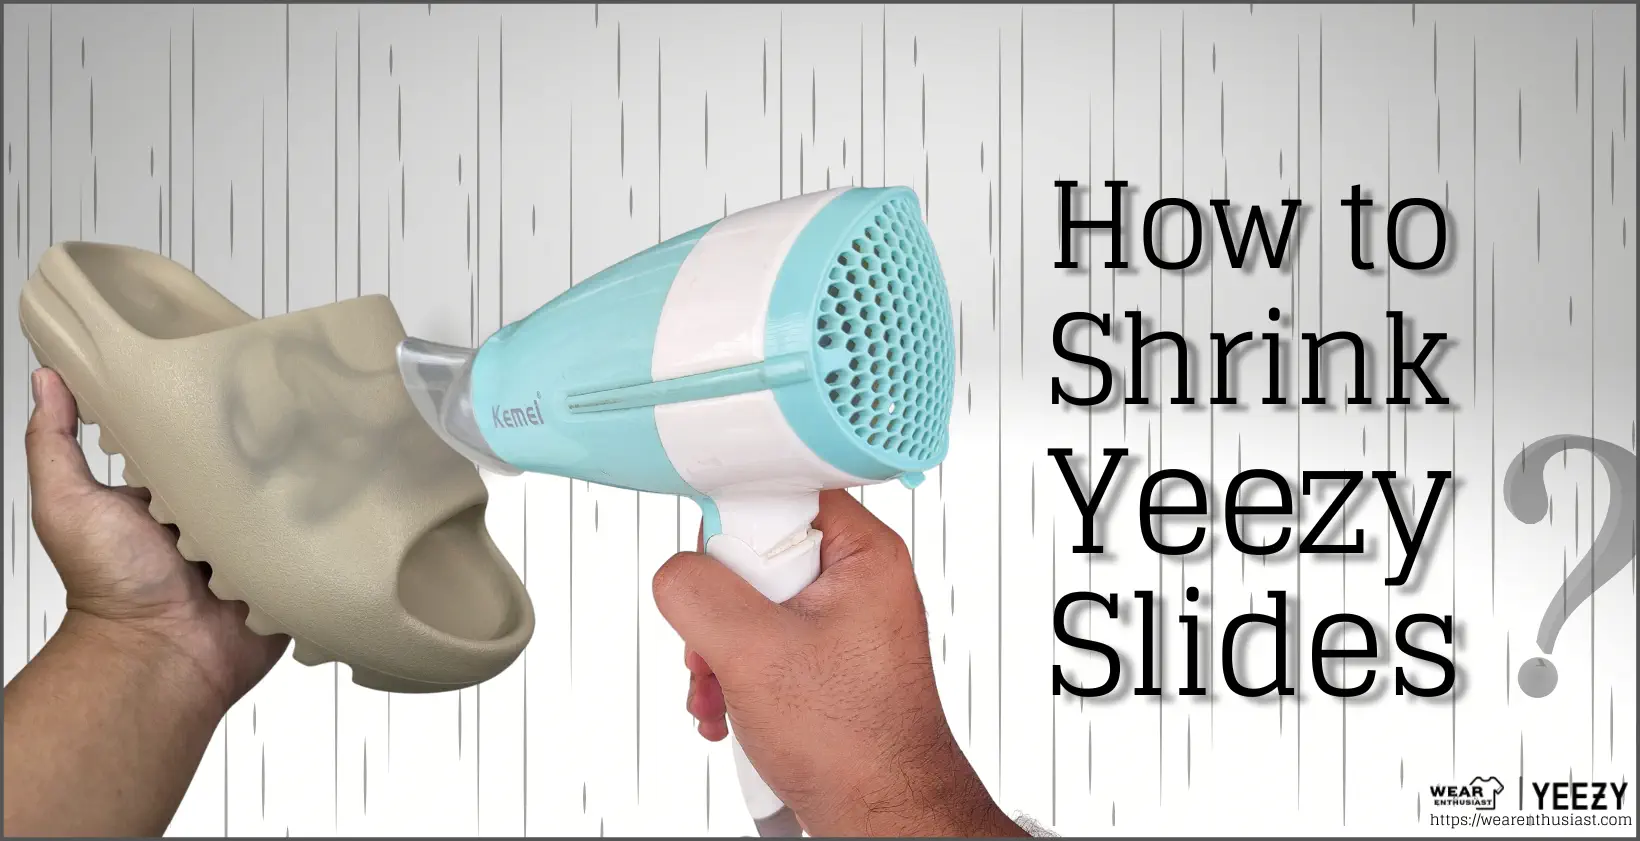 How to Shrink Yeezy Slides